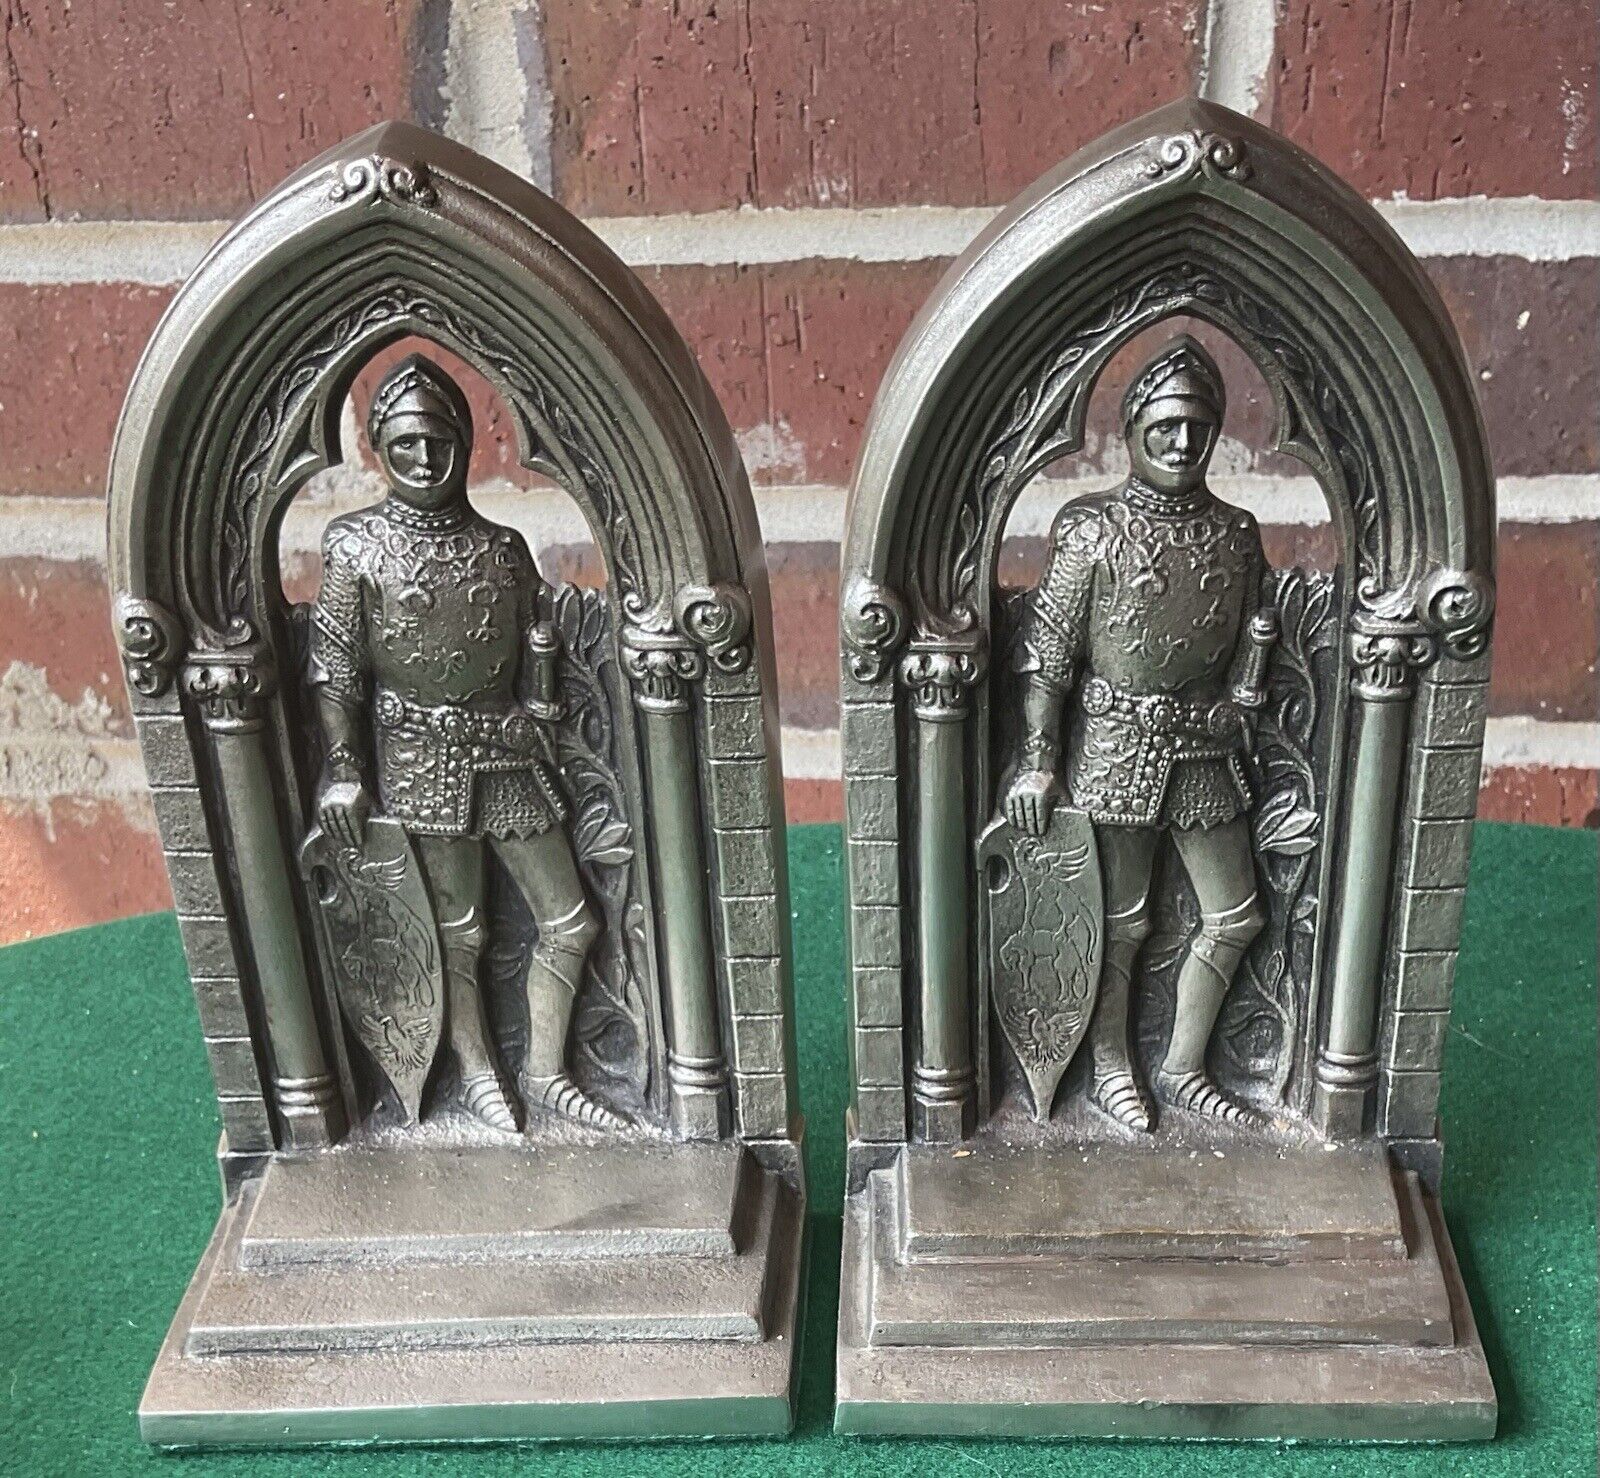 Gorham Co. bookends, Knight in Archway, dated 1931, 10+ Pounds